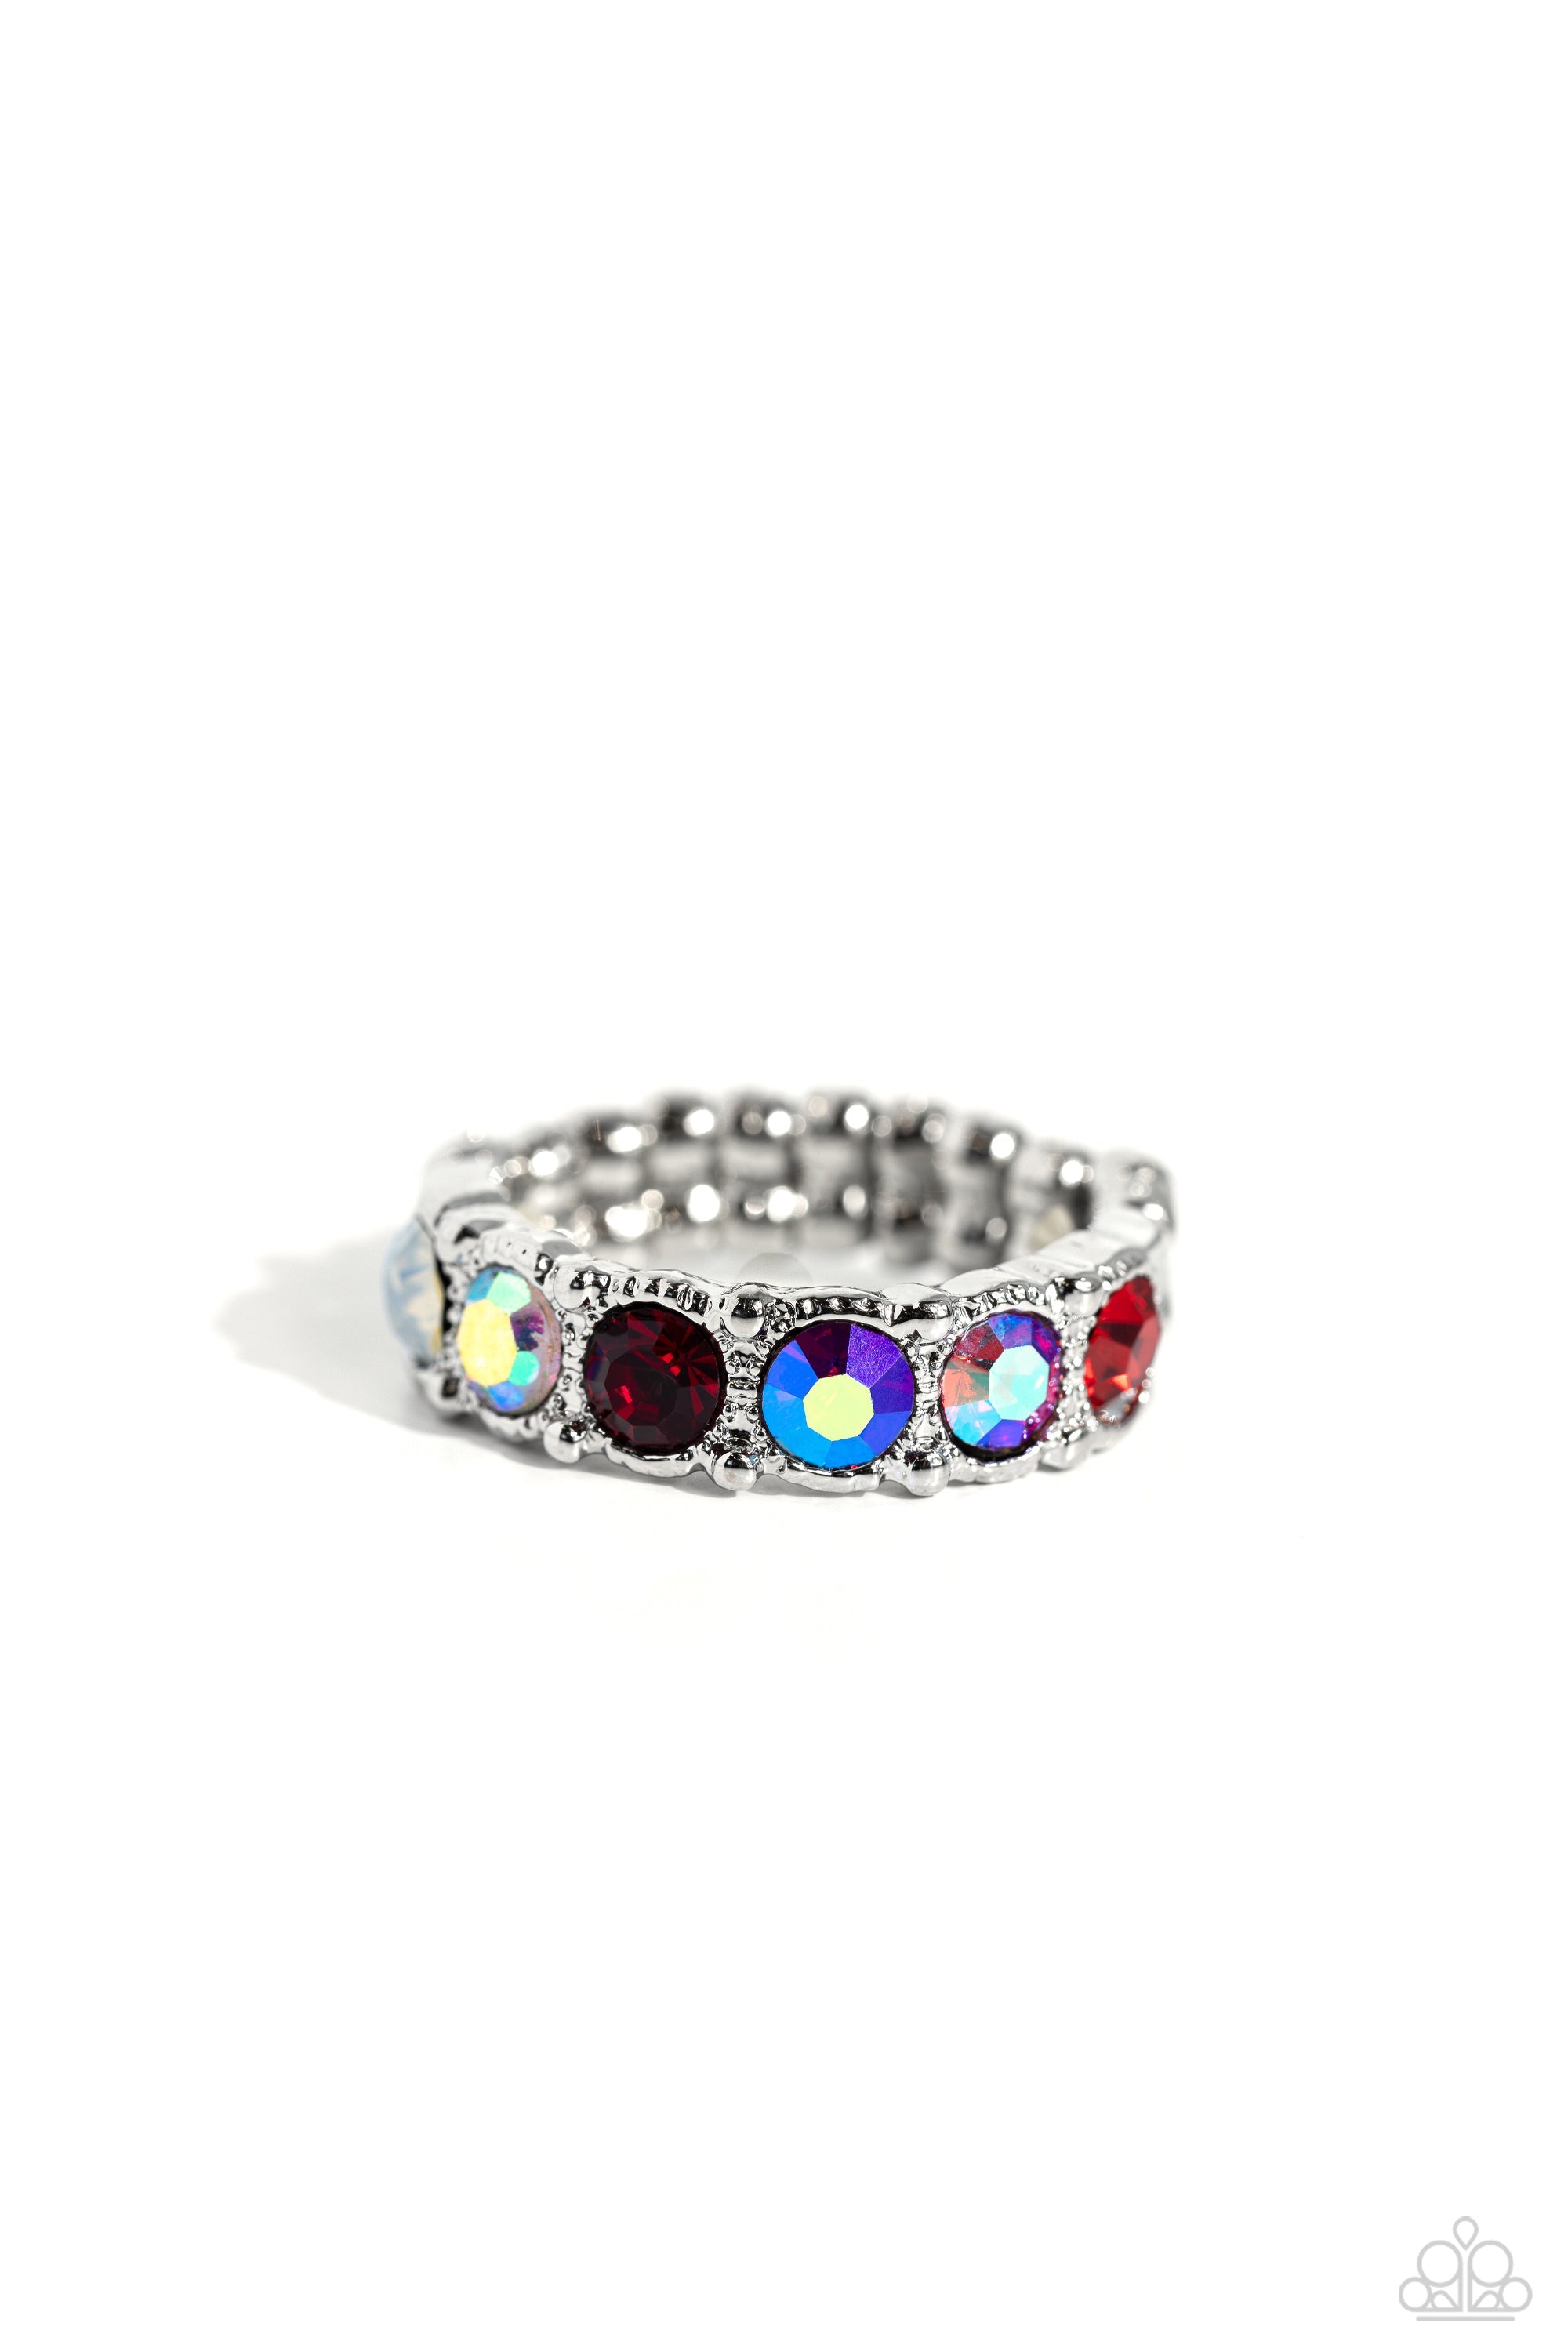 Taming Twilight Red, Iridescent & Opal Rhinestone Ring - Paparazzi Accessories- lightbox - CarasShop.com - $5 Jewelry by Cara Jewels